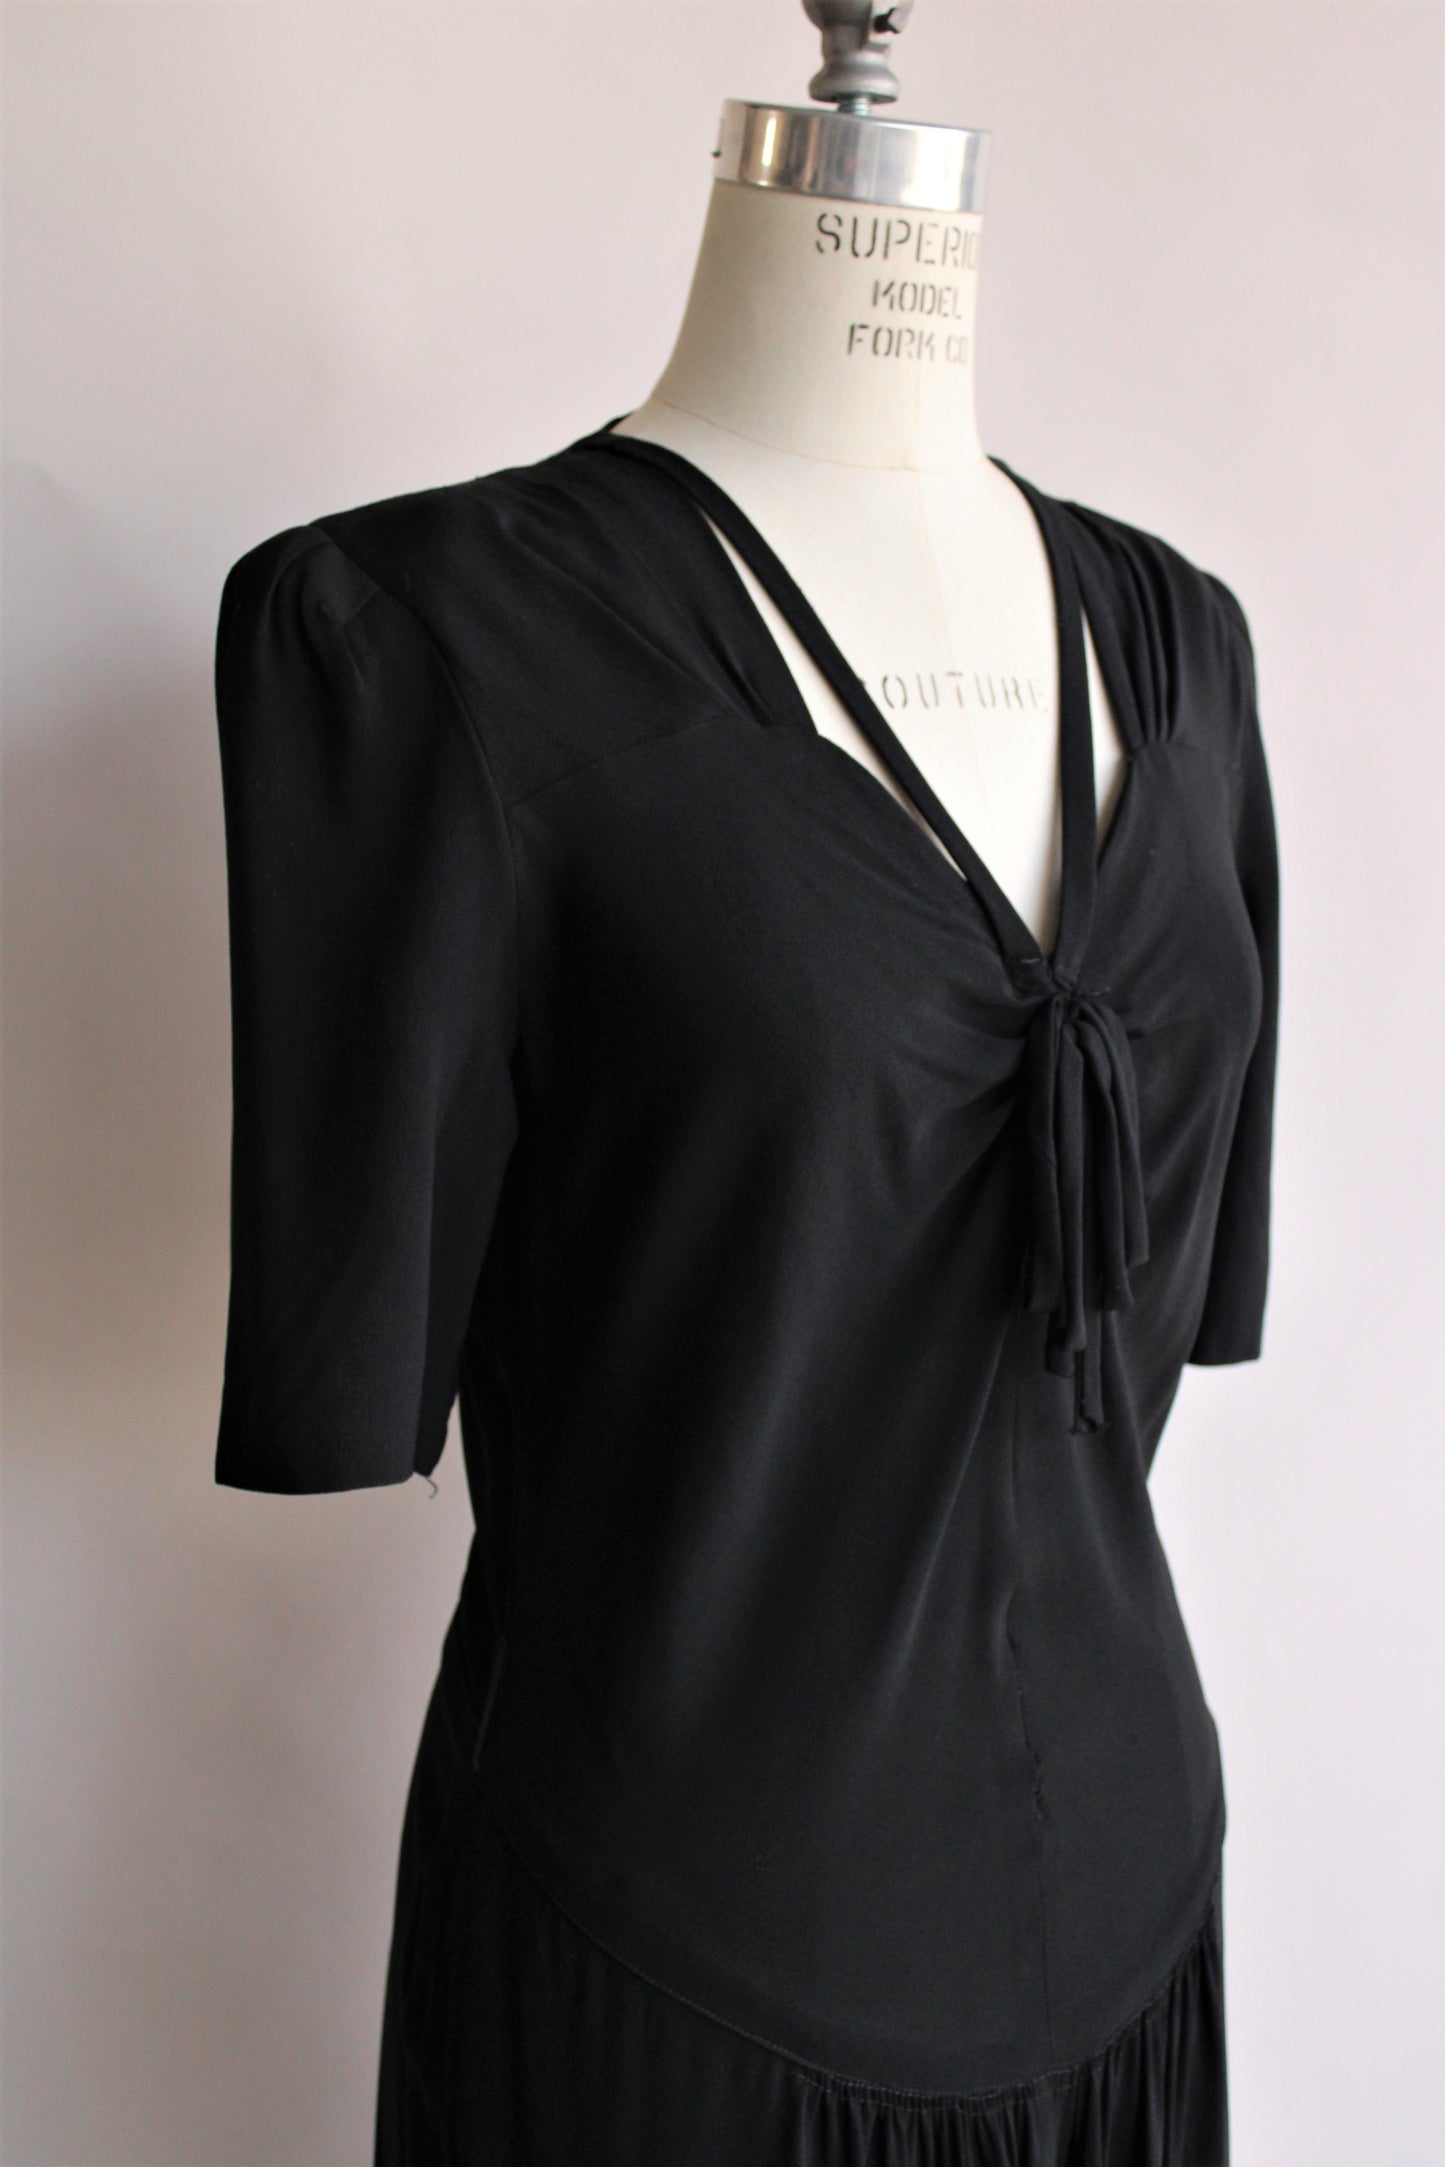 Vintage 1940s Black Dress with Bow